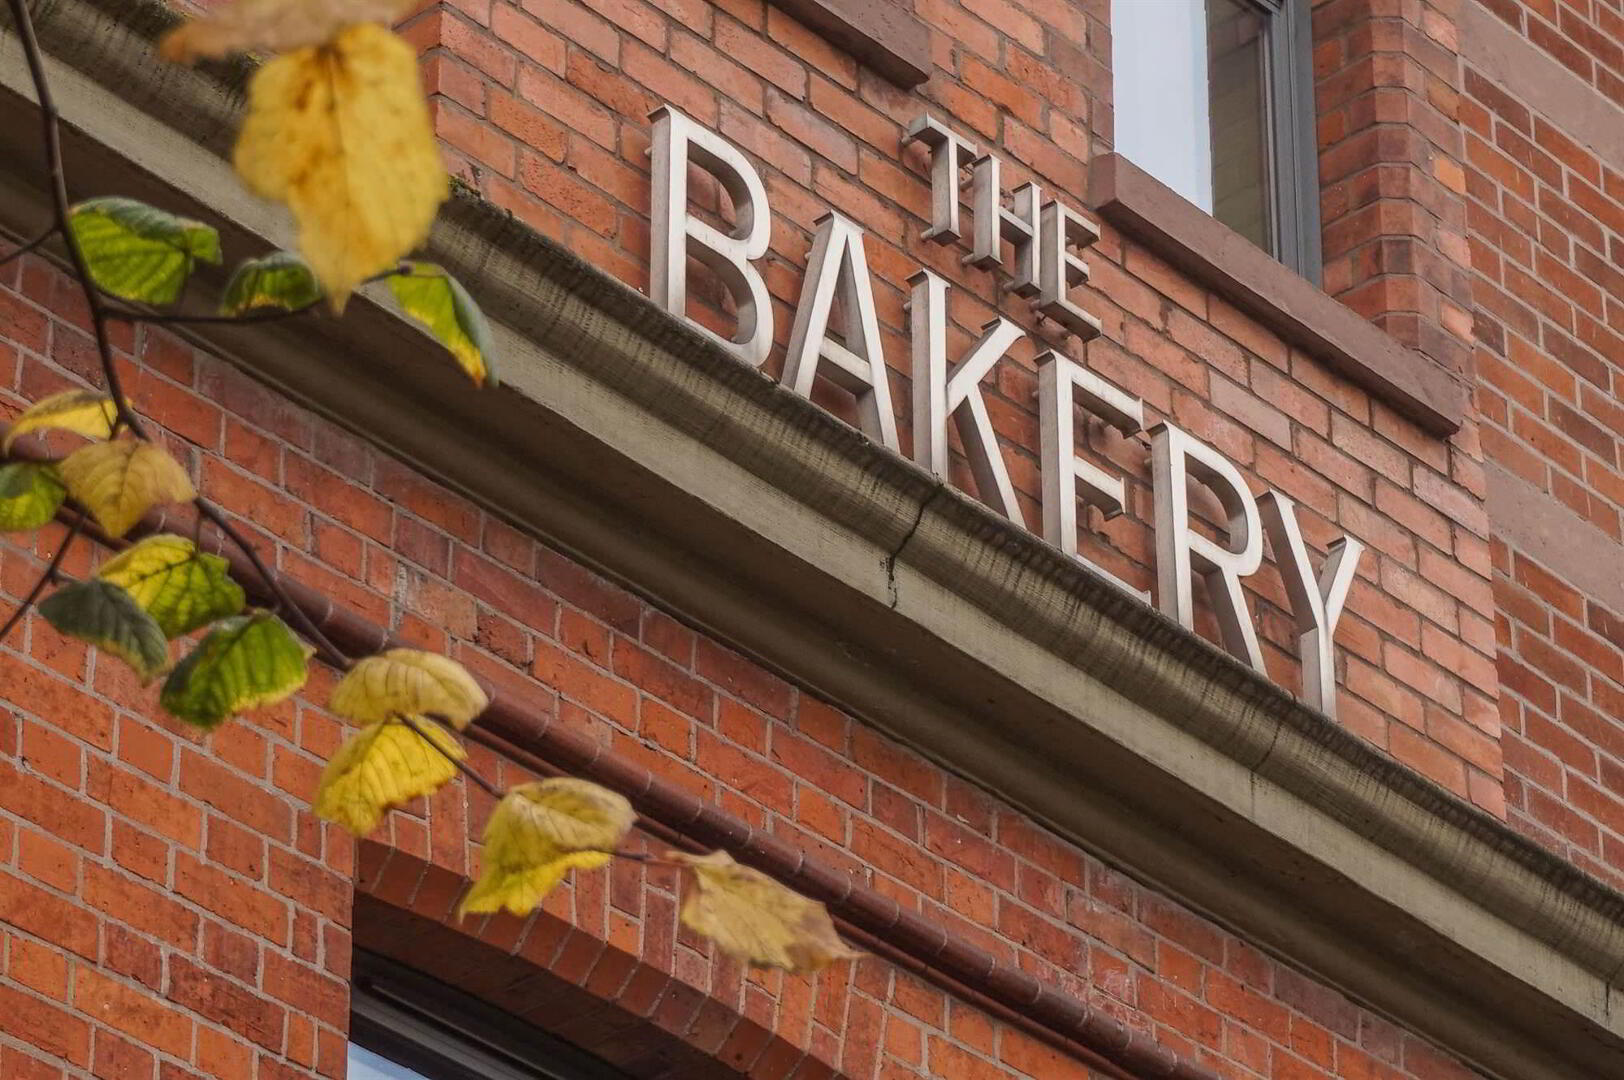 340 The Bakery, 311 Ormeau Road